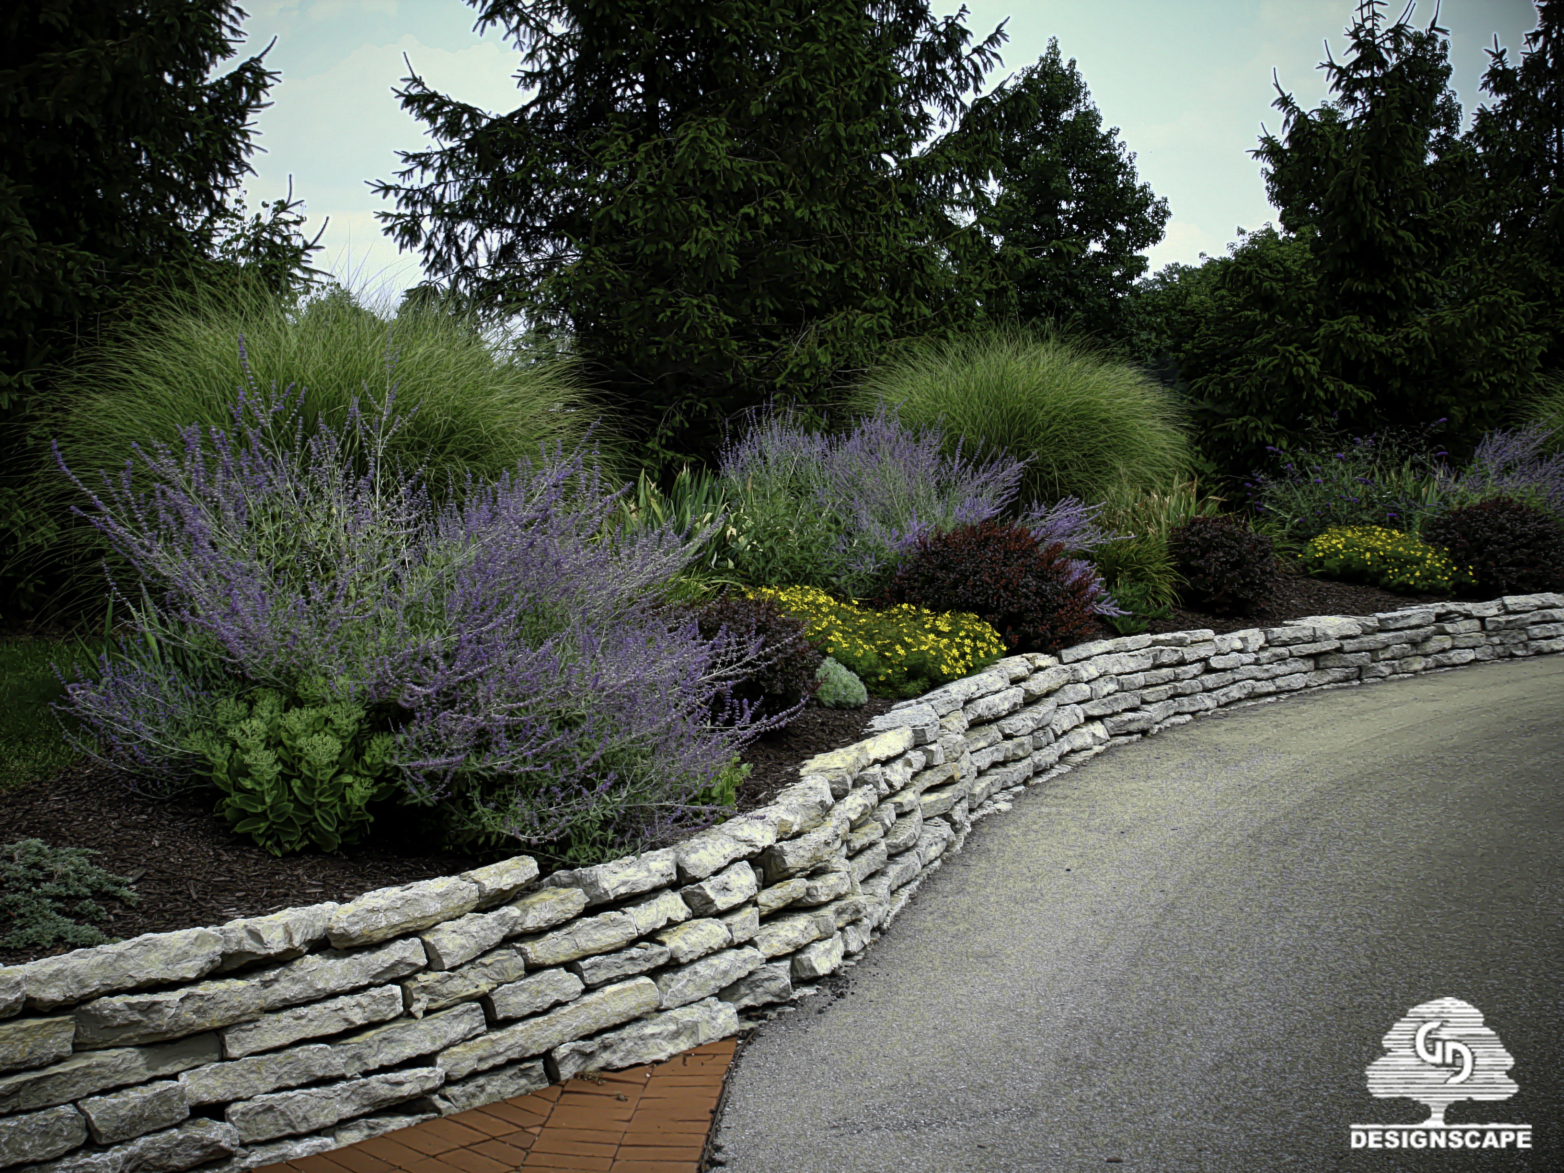 designscape, landscaping, hardscaping, design, landscape architect, natural stone, planting bed, retaining walls, field limestone wall